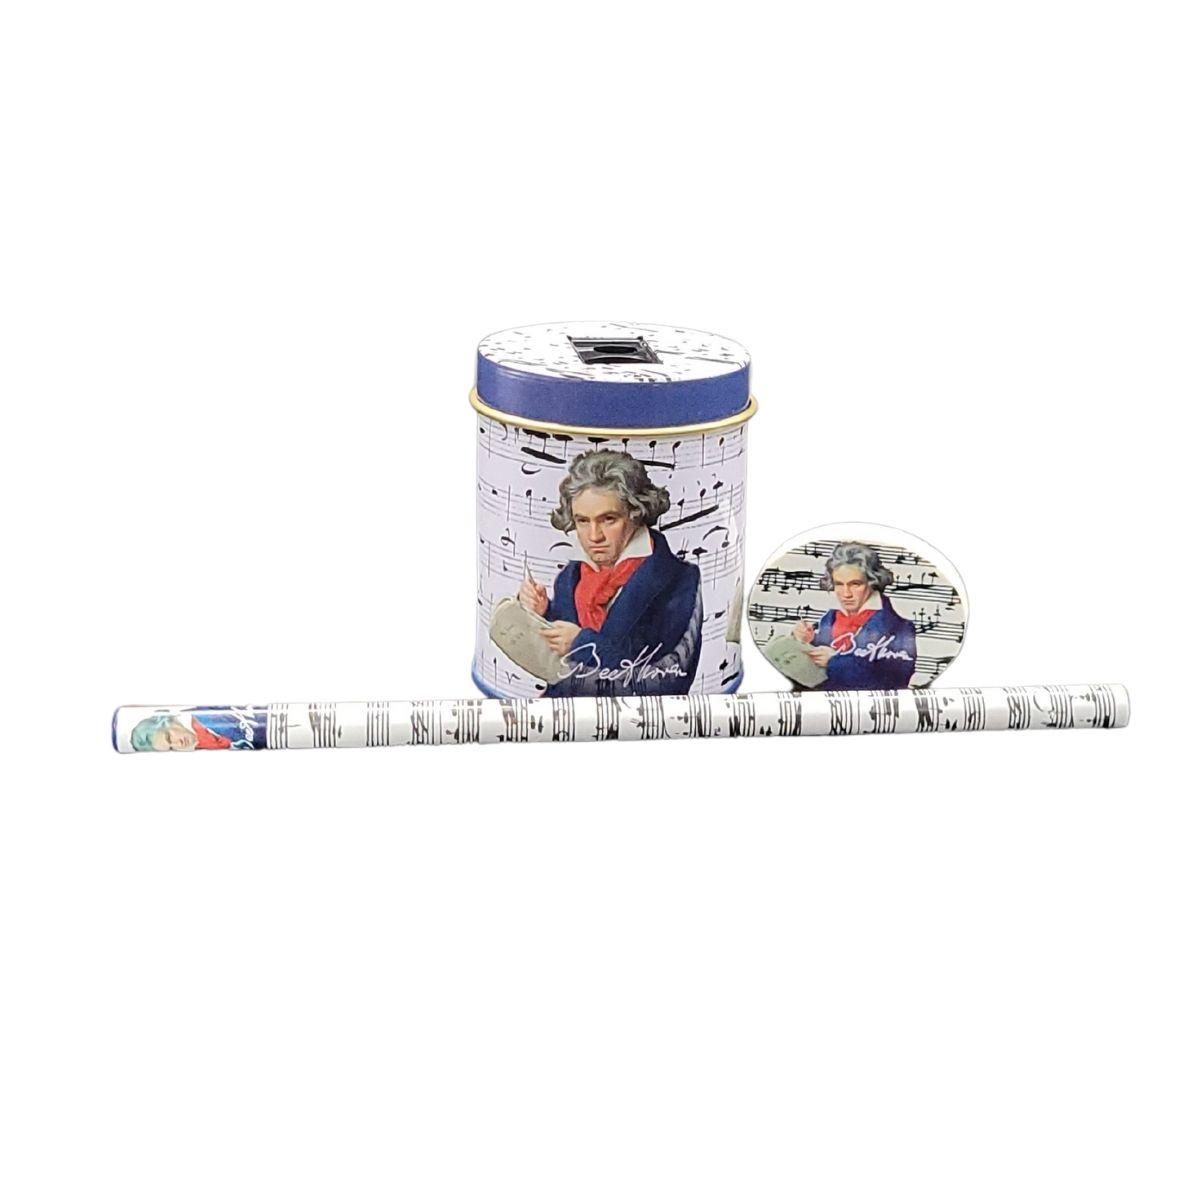 Beethoven writing set with pencil, sharpener and eraser